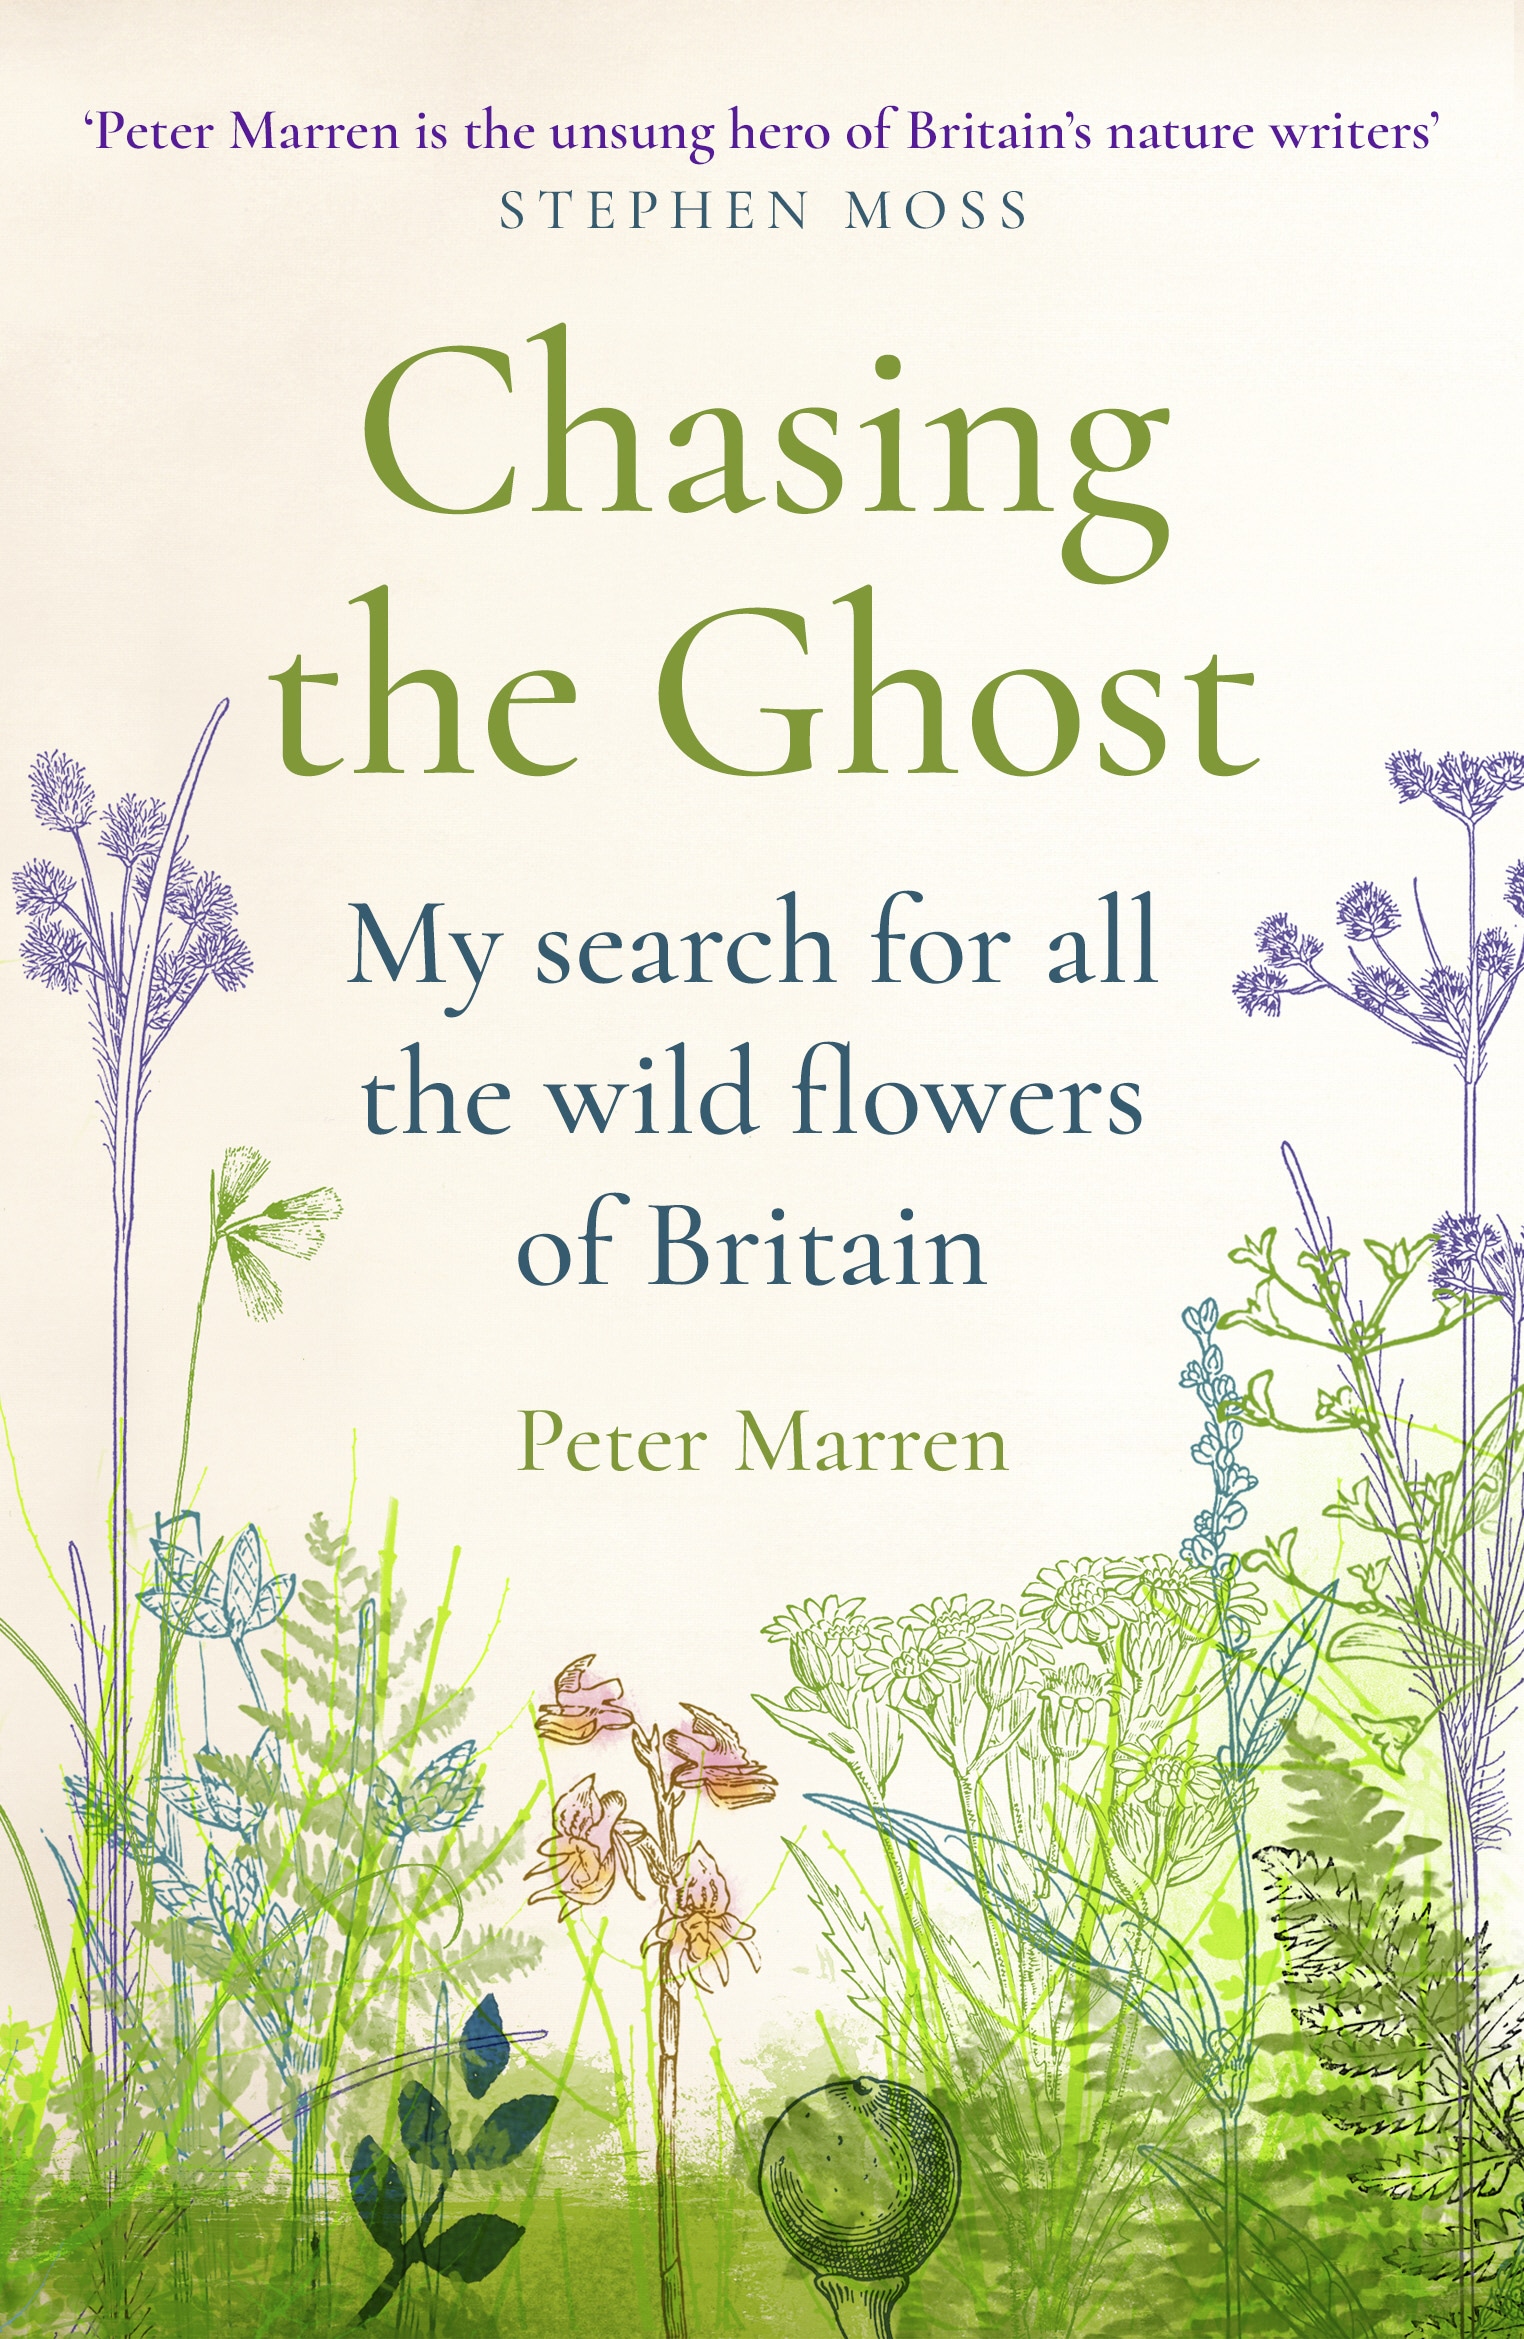 Book “Chasing the Ghost” by Peter Marren — March 14, 2019